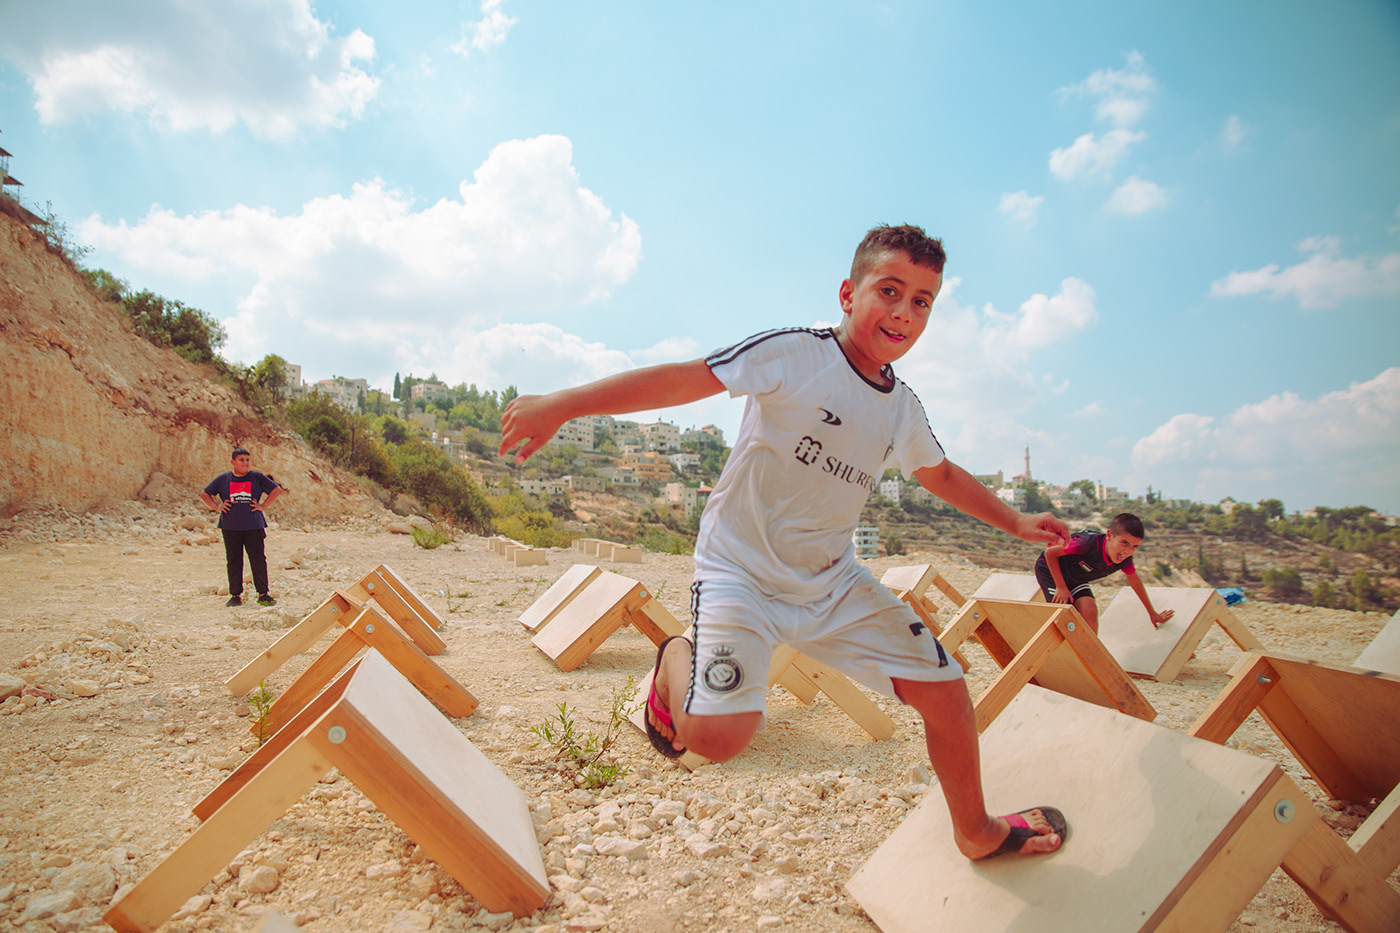 sports obstacles sports photography people faces palestine ramallah Canon photoshop